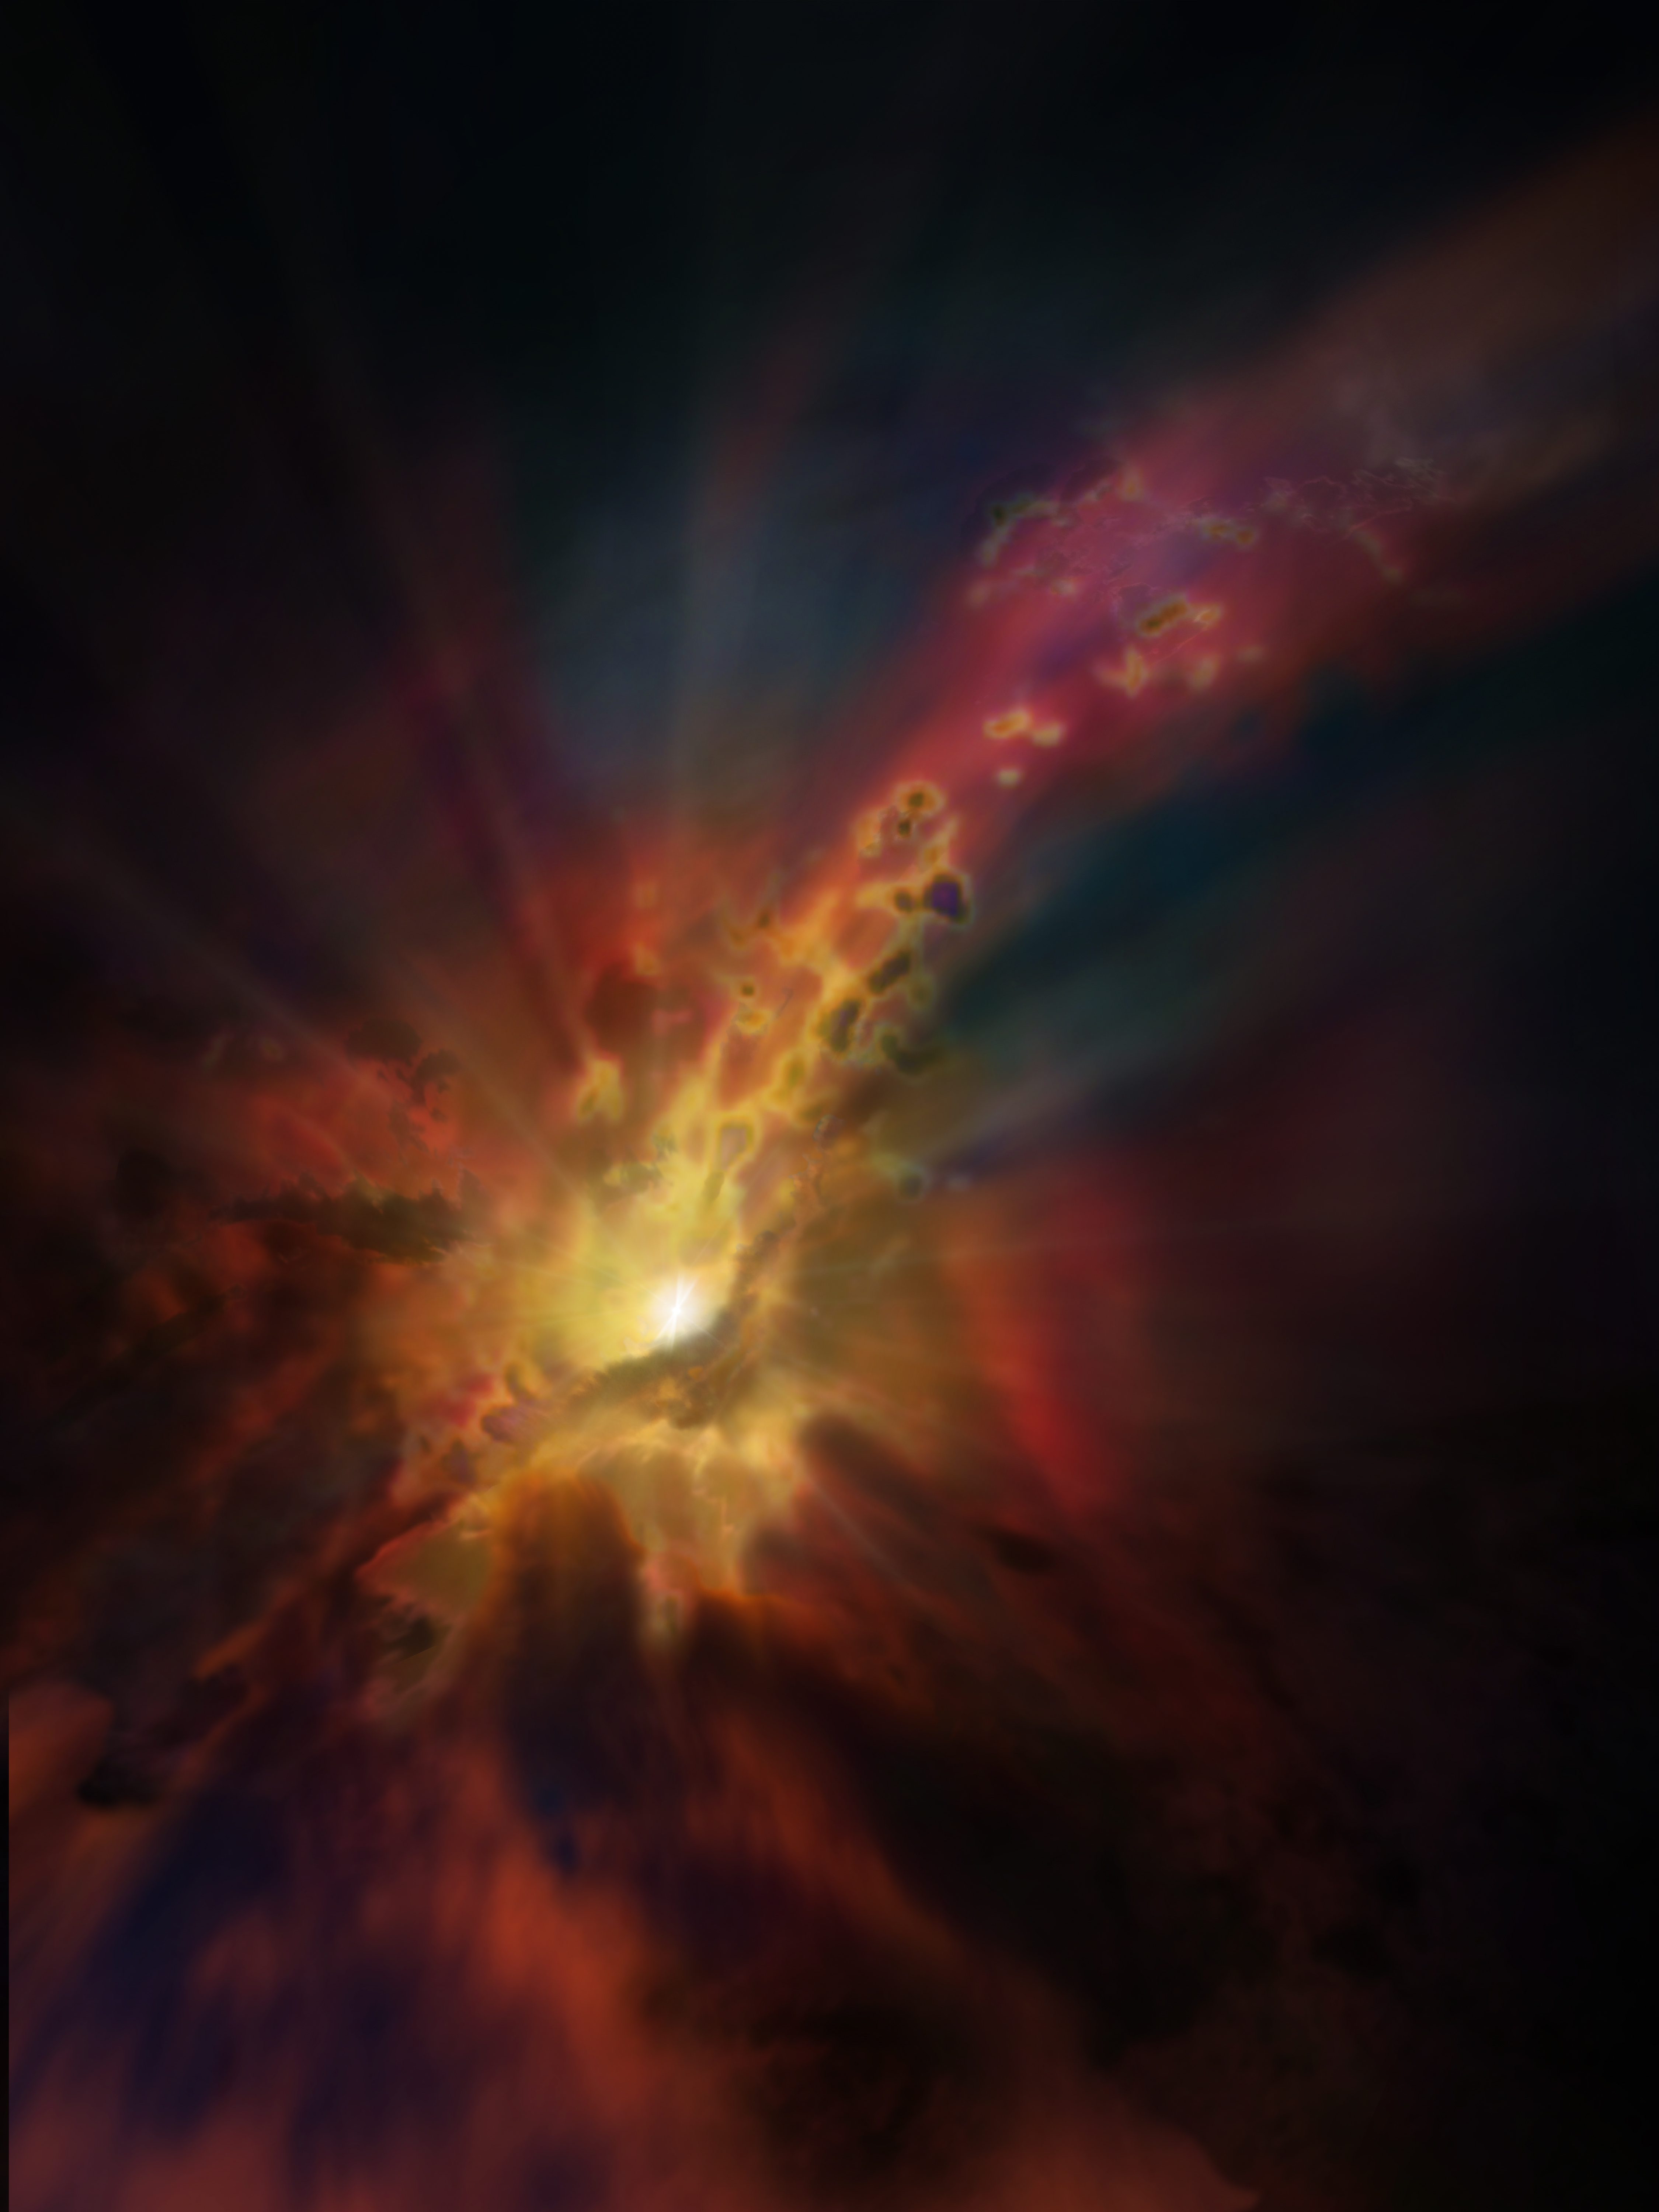 Artist impression of an outflow of molecular gas from an active star-forming galaxy.